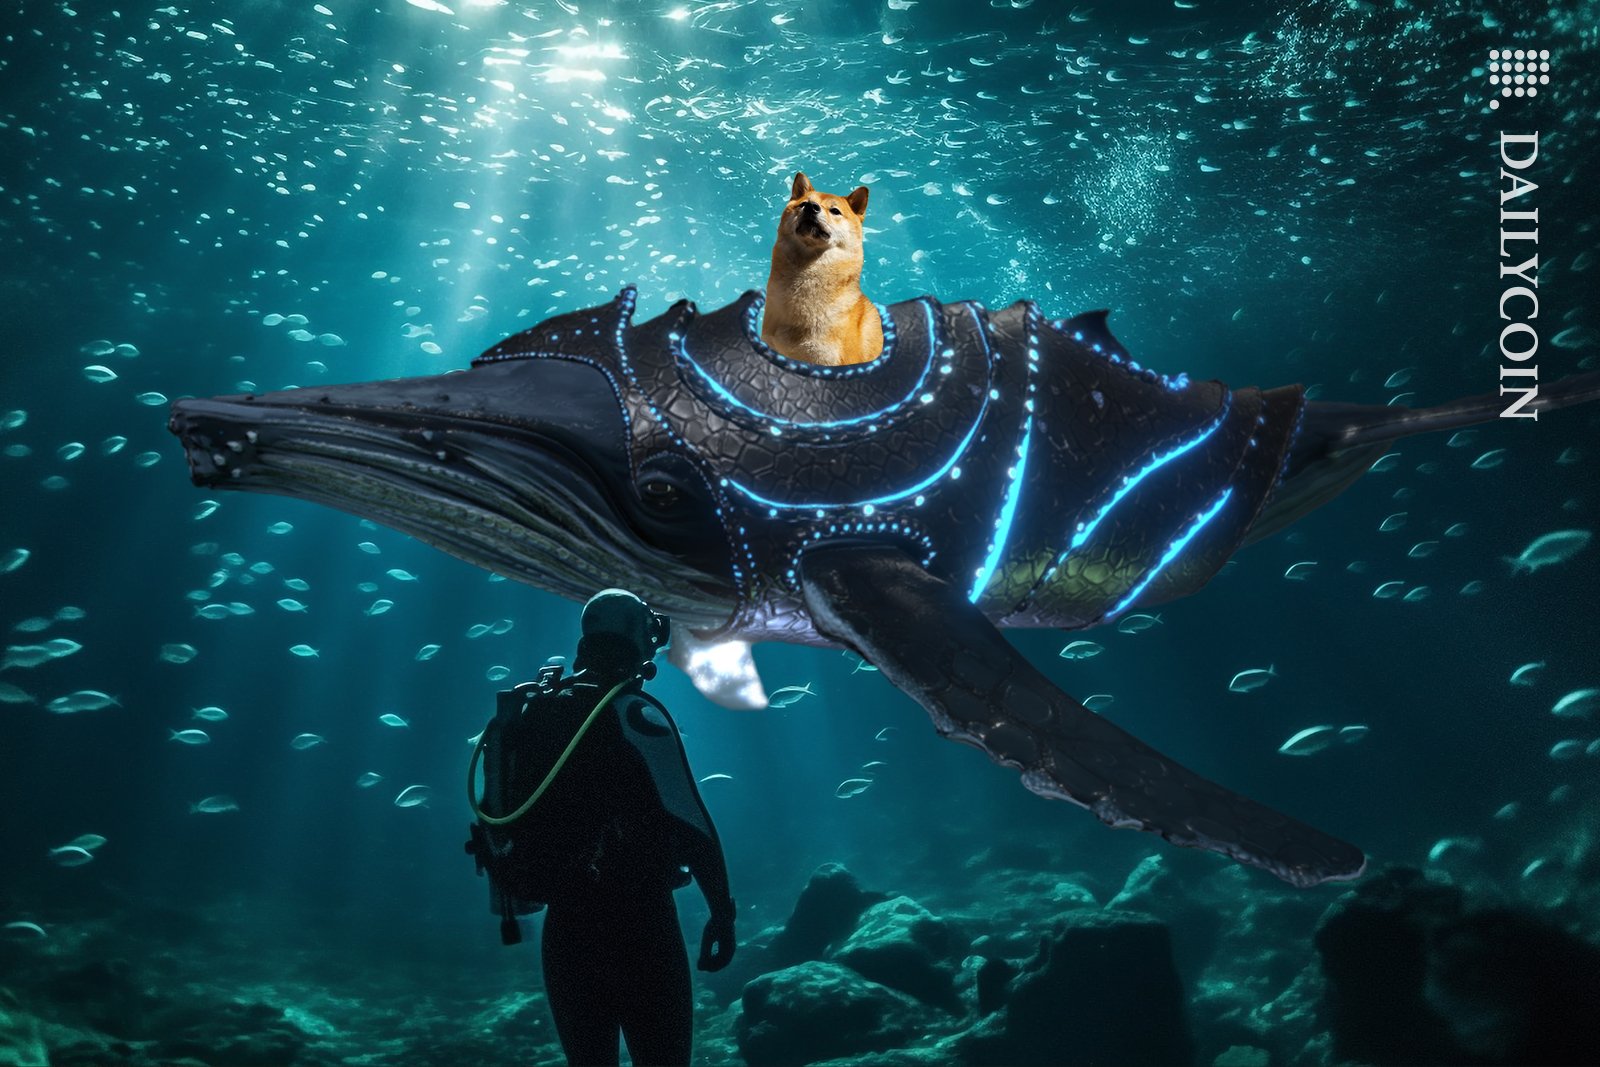 Technology whale carries Shiba Inu on top of his back. In a deep ocean, with fish swimming around and scuba diver looking at the whale.